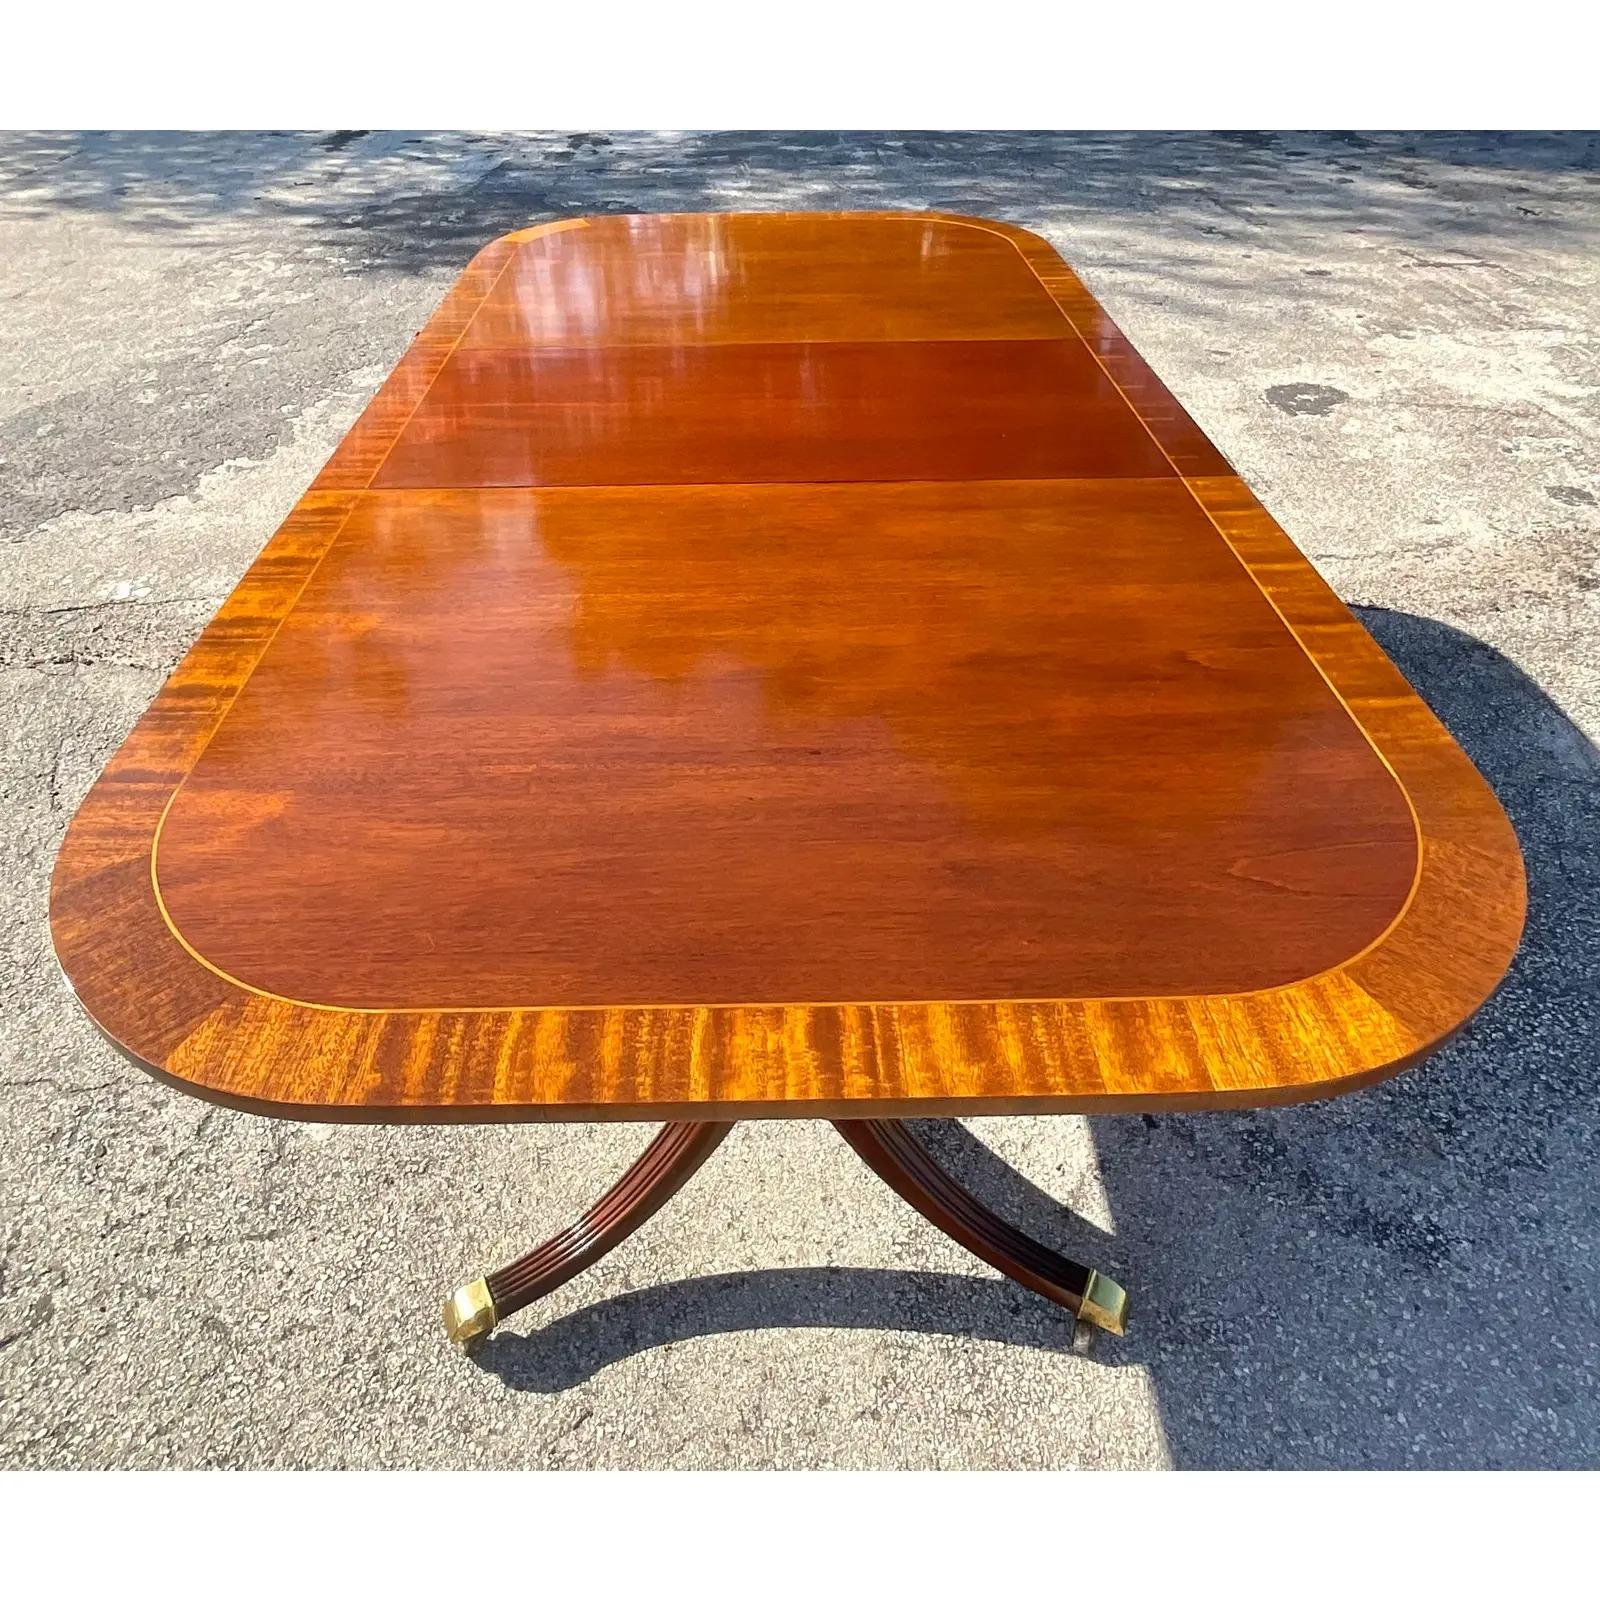 A fabulous vintage Georgian Duncan Phyfe dining table. Made by the iconic Councill furniture group. Beautiful banded mahogany with a double classic pedestal. Acquired from a Palm Beach estate.